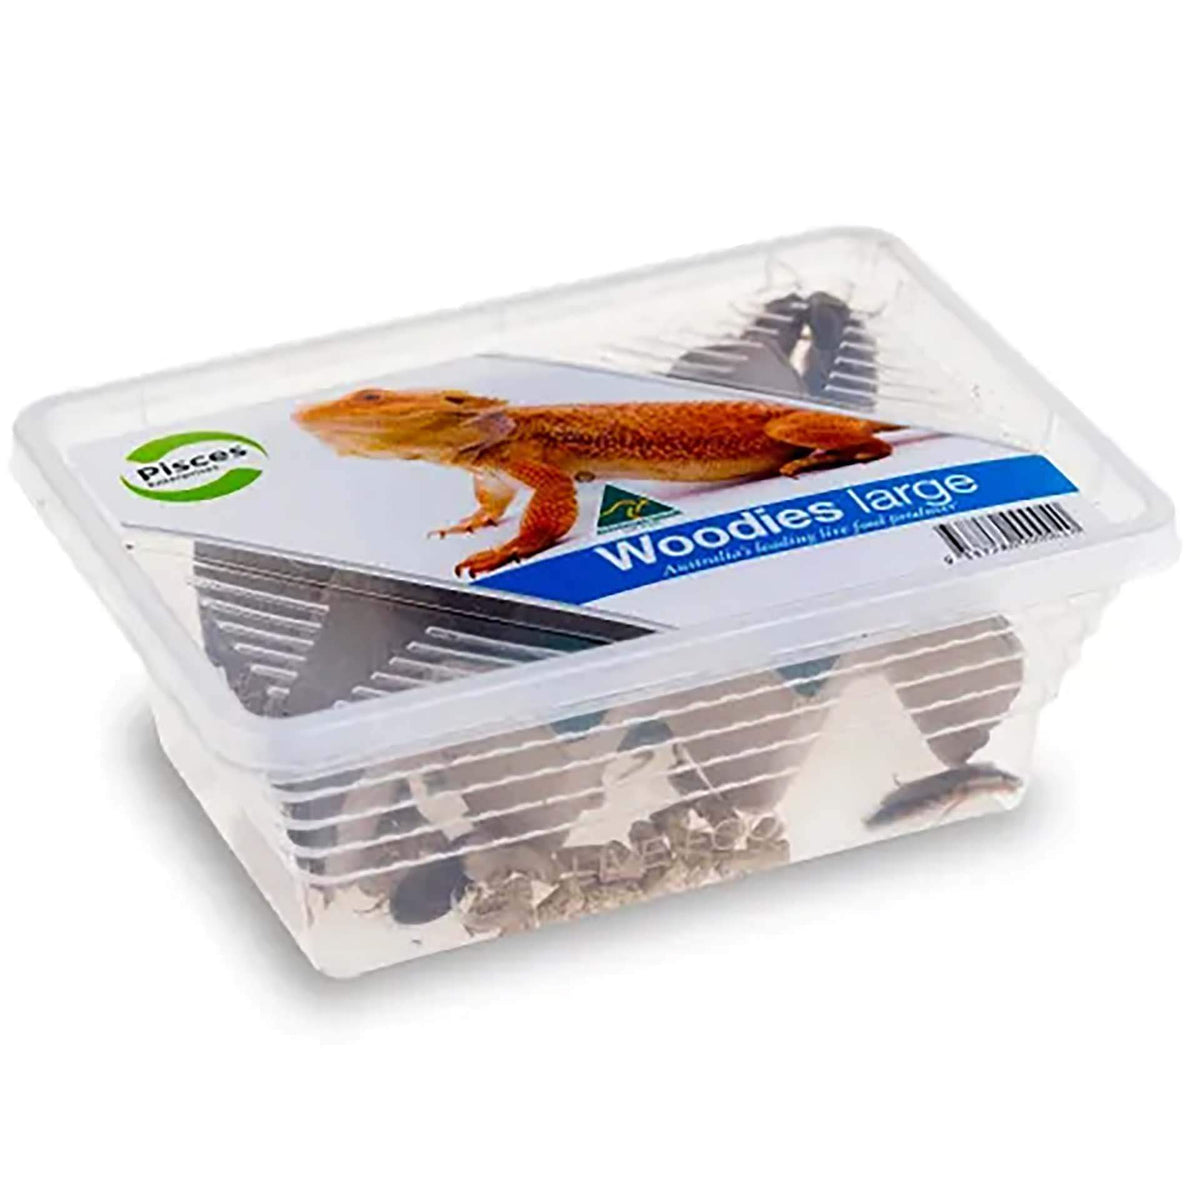 Pisces Woodies Large - 50g Tub Live Food - Instore Pick Up Only